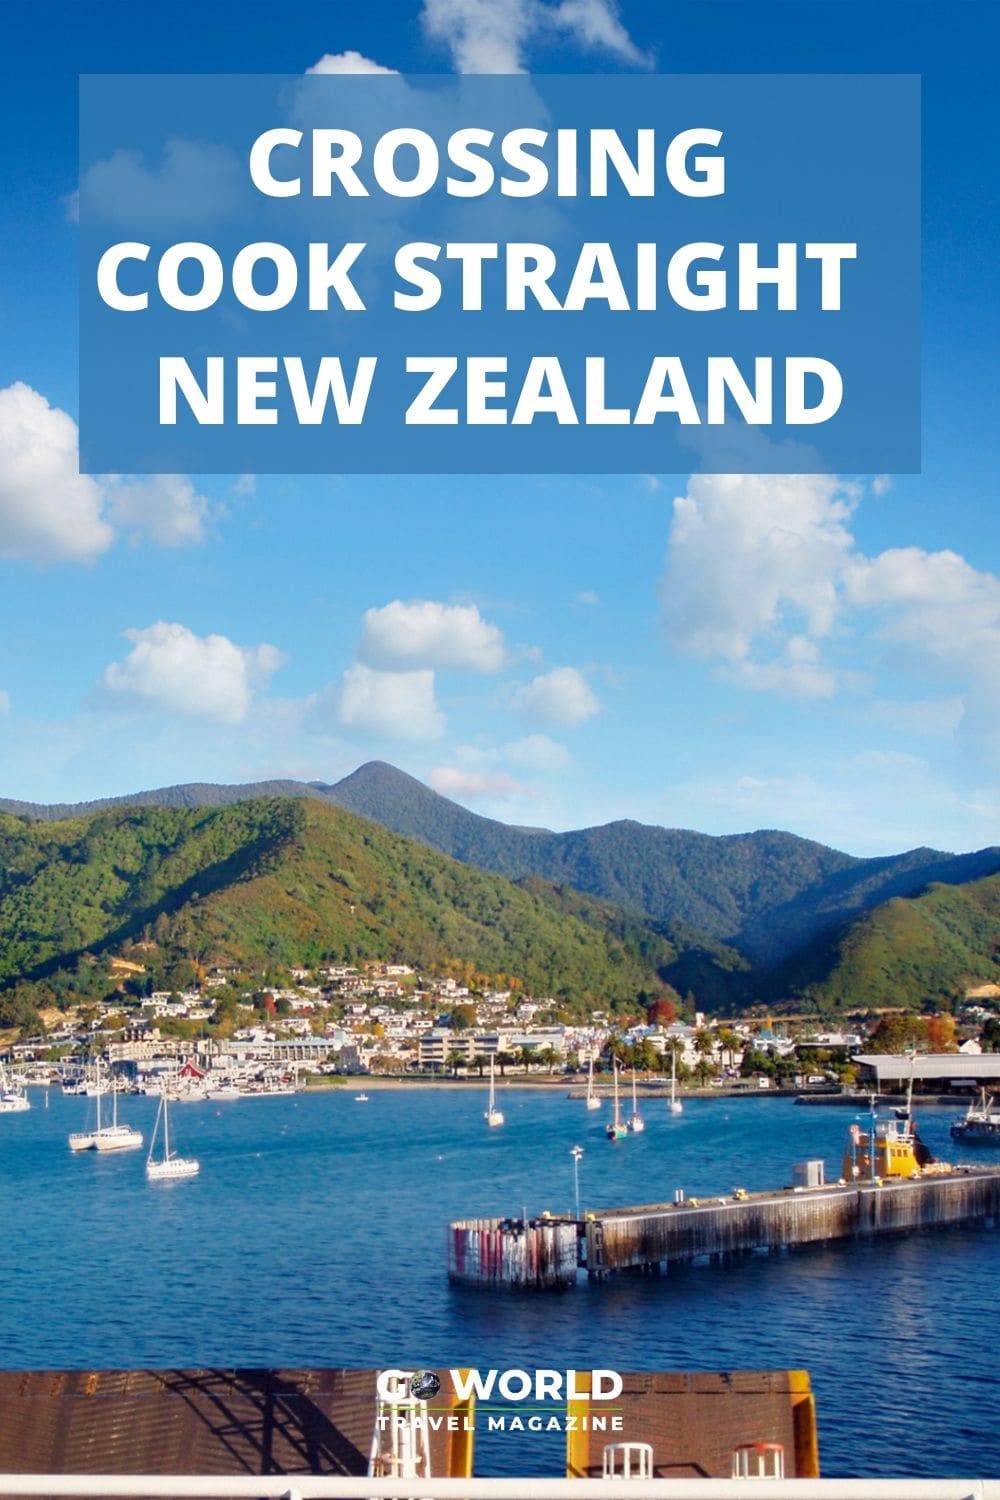 Inter Islander, NZ ferry that crosses the Cook Straight from Wellington to Picton is one of the Great Journeys of NZ. Here's what to expect. #interislandernz #newzealand